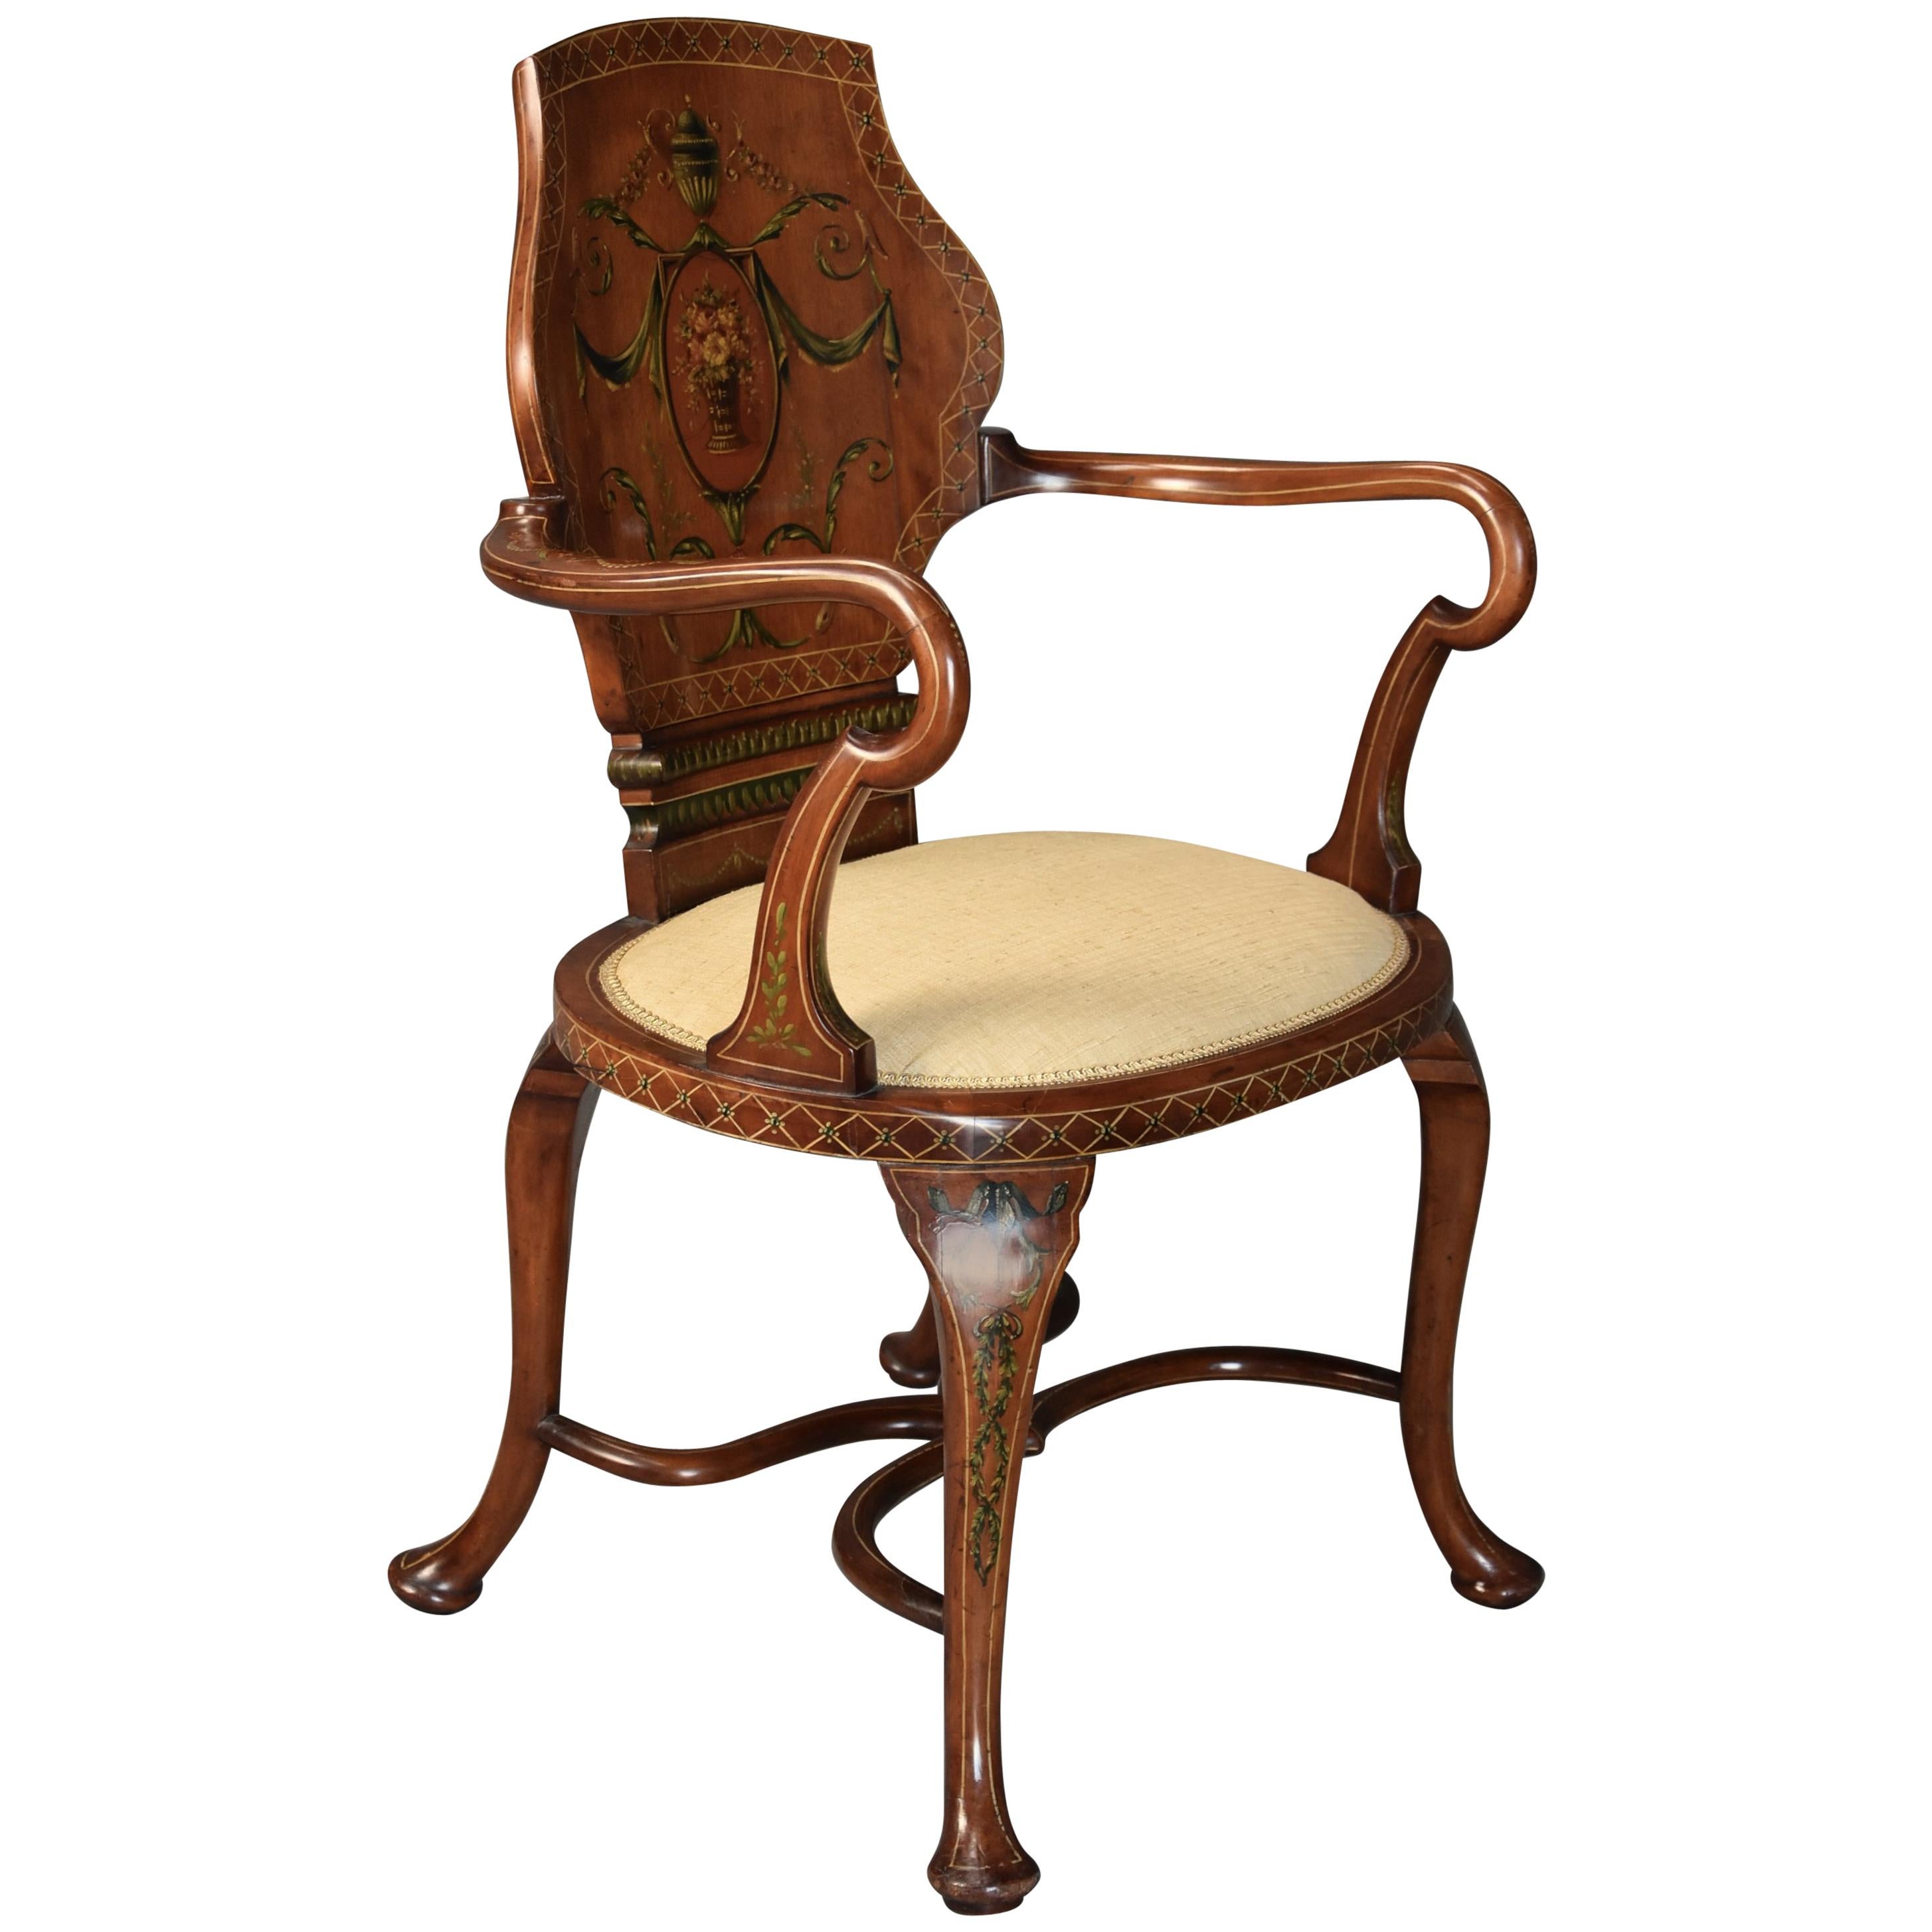 Highly Decorative Edwardian Satinwood and Painted Armchair in the Georgian Style For Sale